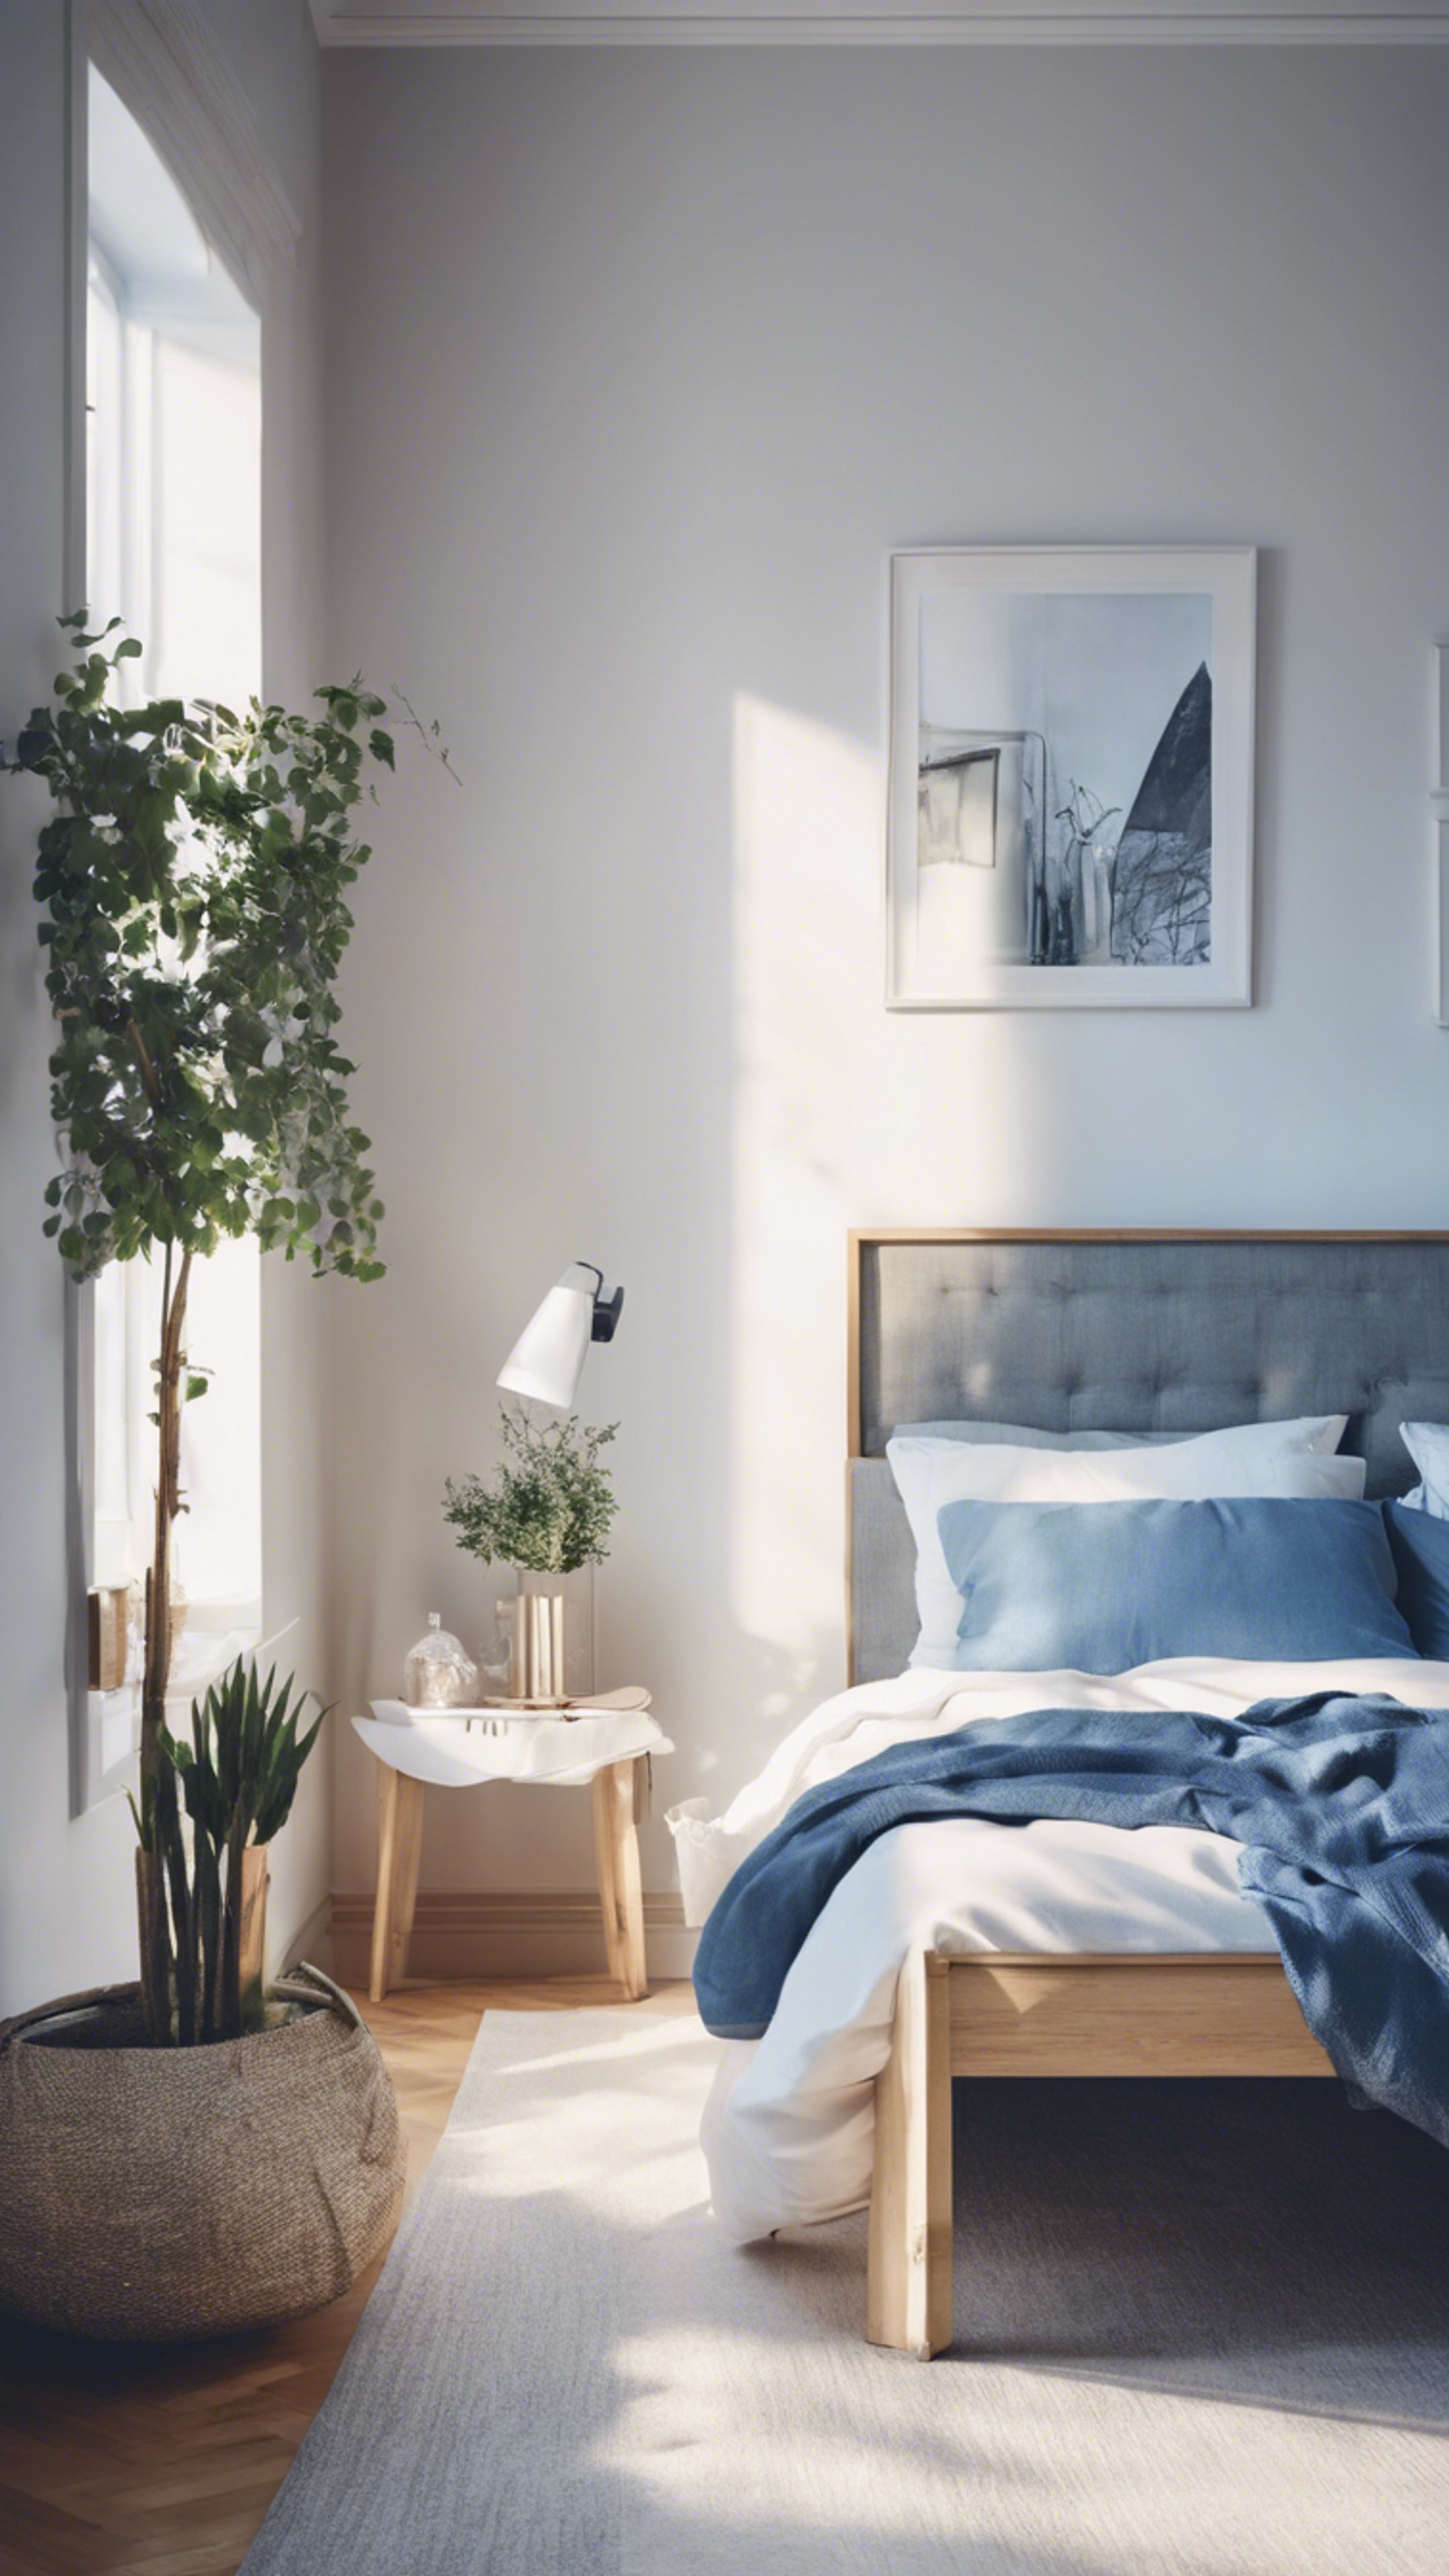 A Scandinavian style bedroom with white and blue minimalist decor bathed in morning sunlight. Тапет[5ddcfeaf0e5340e39bc5]